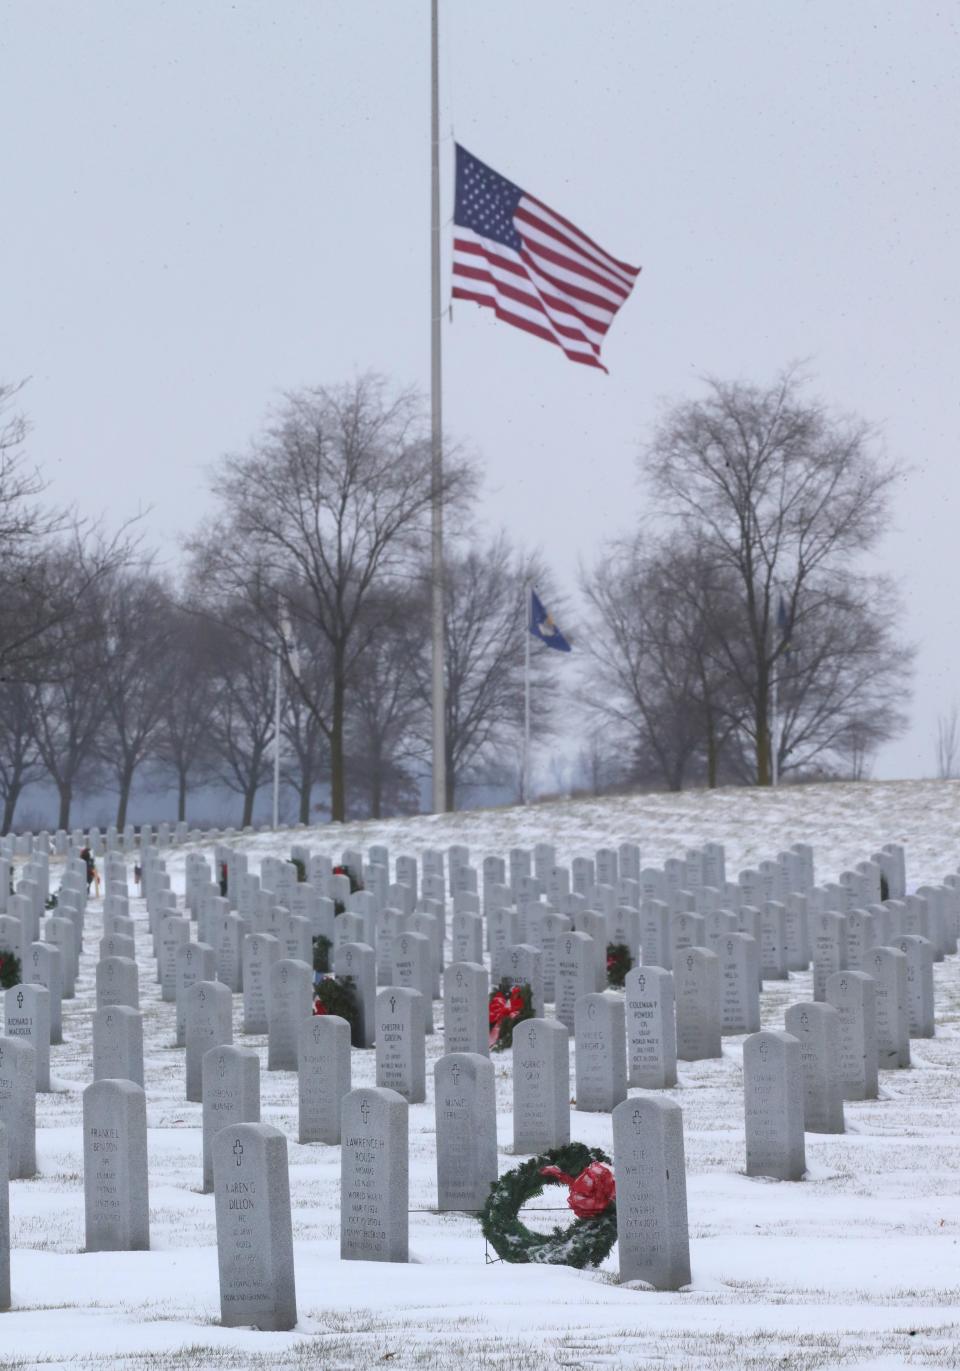 Ohio Western Reserve National Cemetery has purchased Rawiga Golf Club so the cemetery can expand.